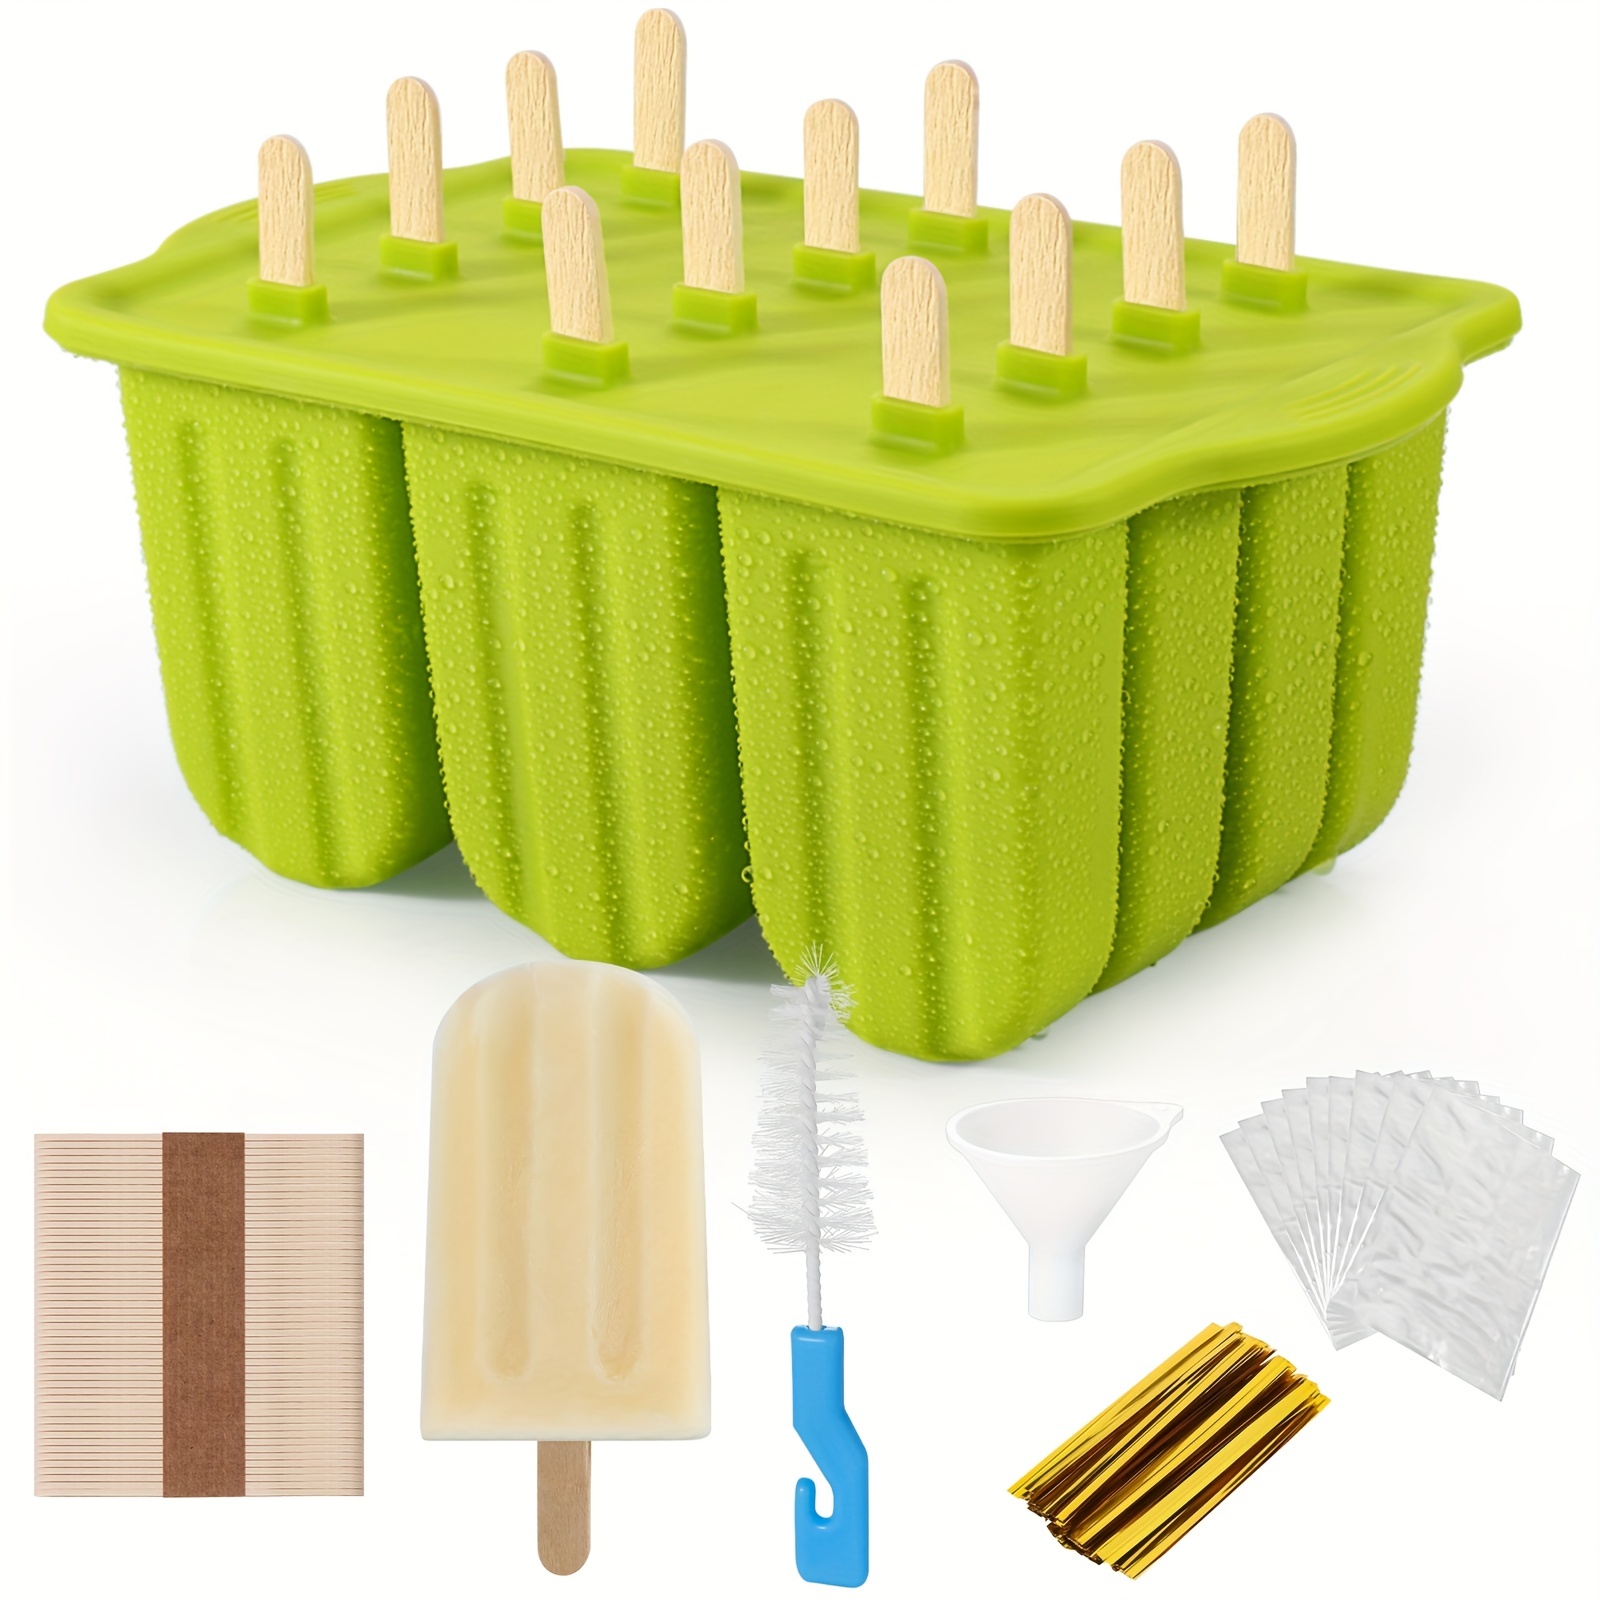 Ice Pop Maker Popsicle Mold Cream Mould